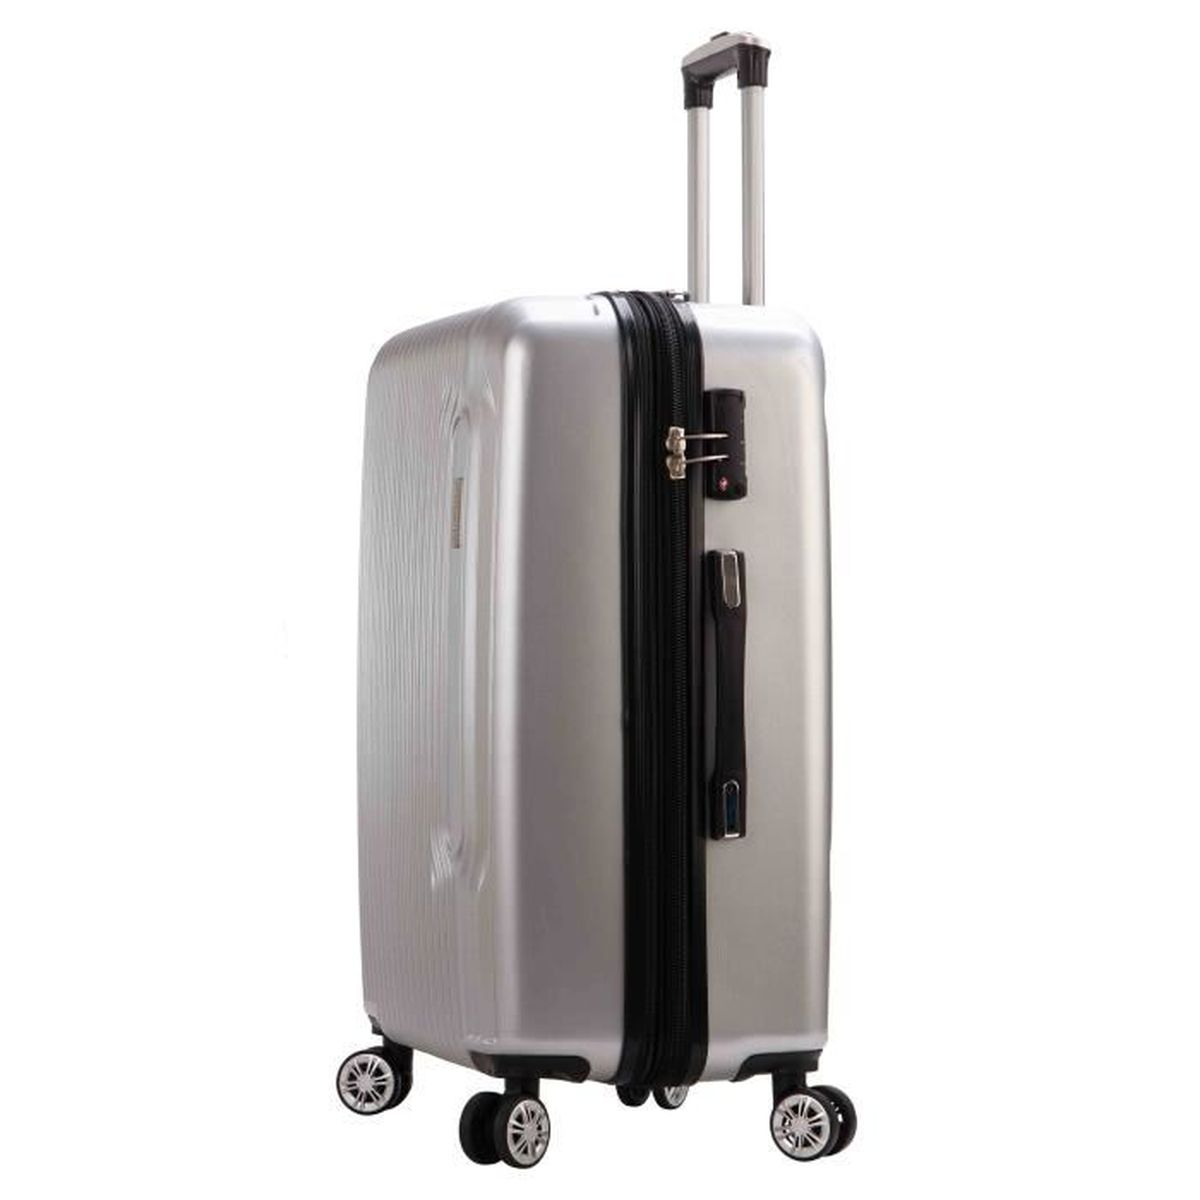 55x38x20 Cabine Bagages à main valise 360 ° 4 roulettes abs travel case sac